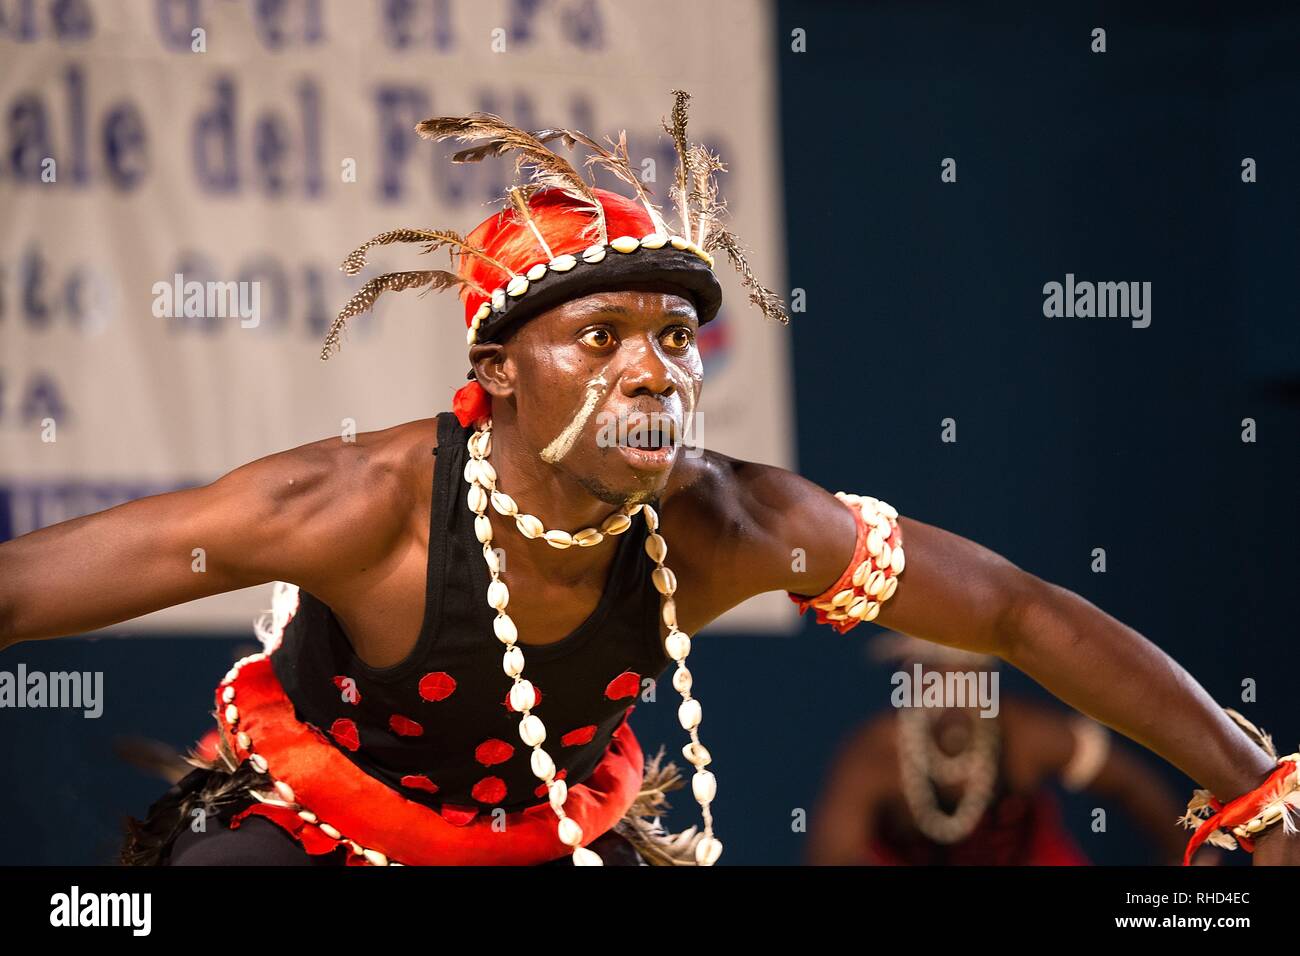 Gorizia, Italy - August 26, 2017: Dancer of Benin traditional dance company in the town street during the International Folklore festival Stock Photo